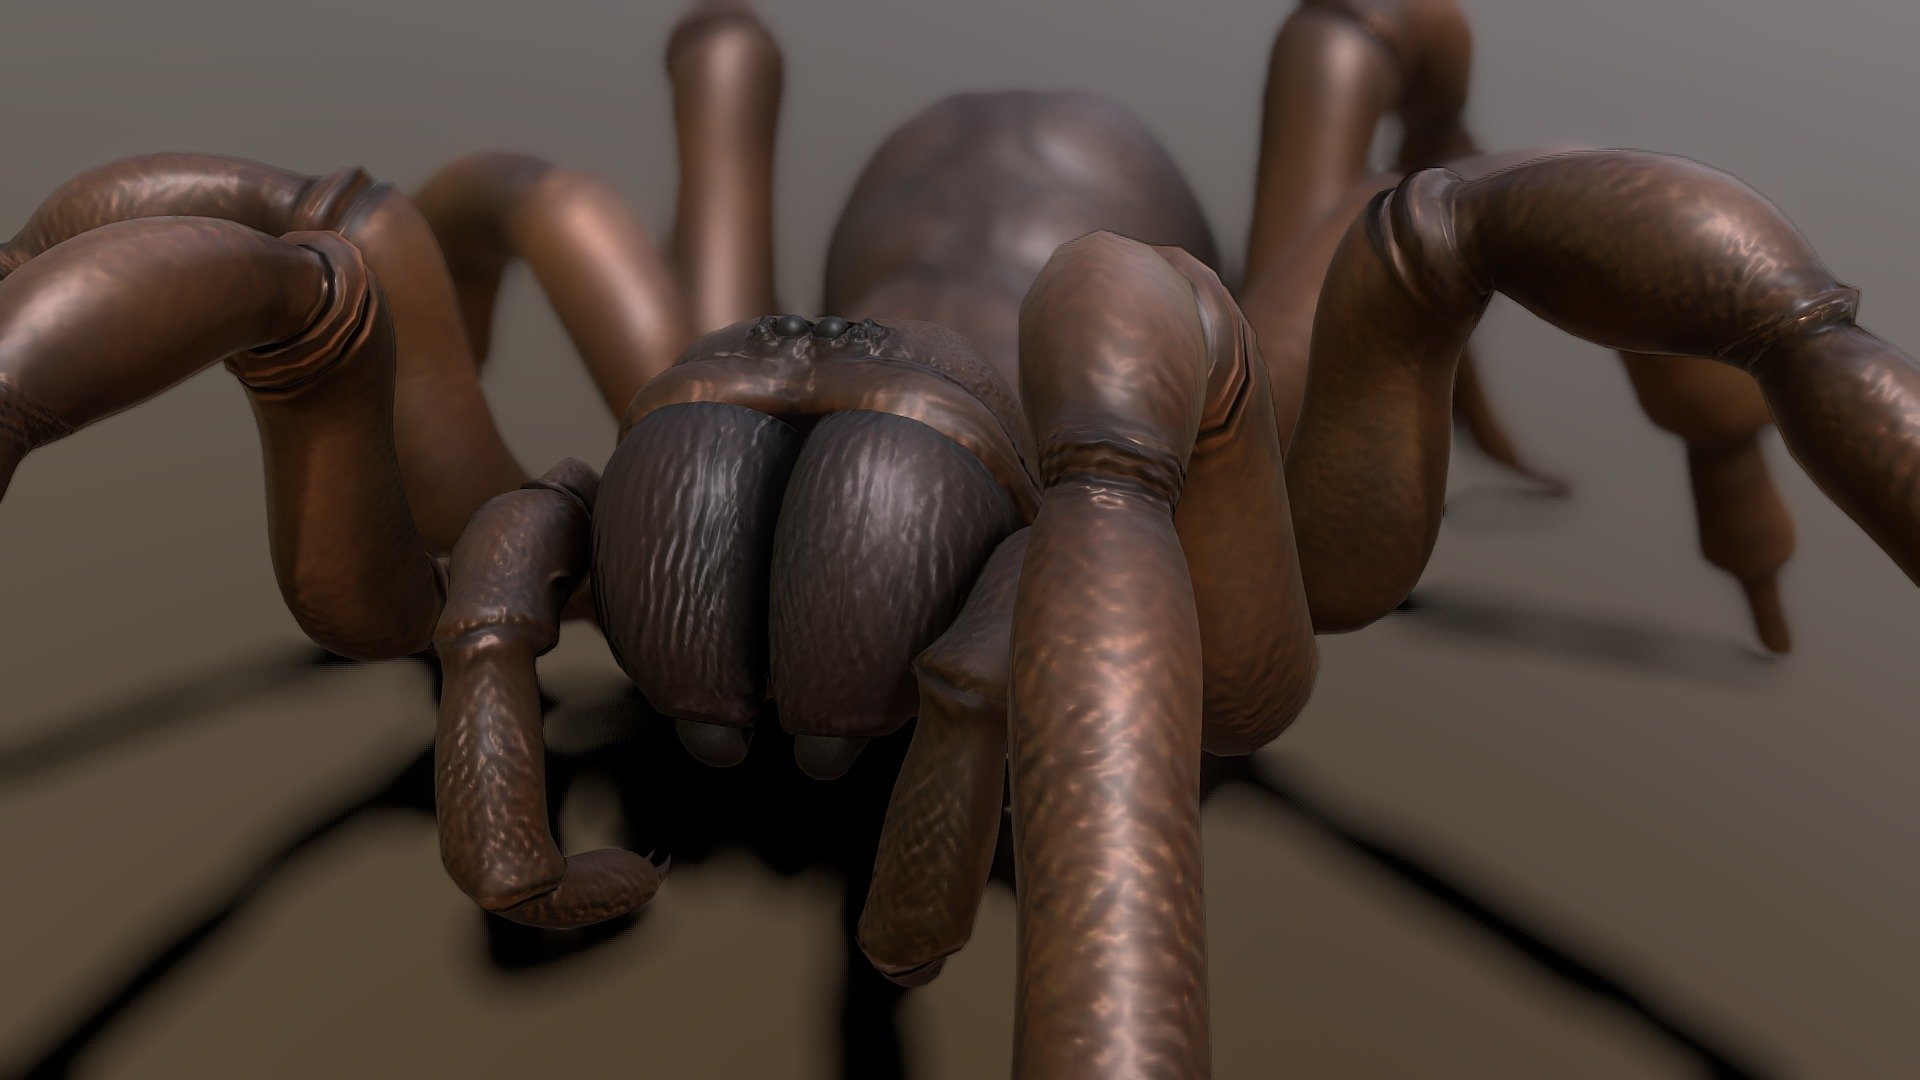 Ctenizidae is a small family of mygalomorph spiders that construct burrows with a cork-like trapdoor made of soil, vegetation, and silk.

Define by Google - Trap Door Spider - Download Free 3D model by ArachnoBoy (@vang807) 3d model